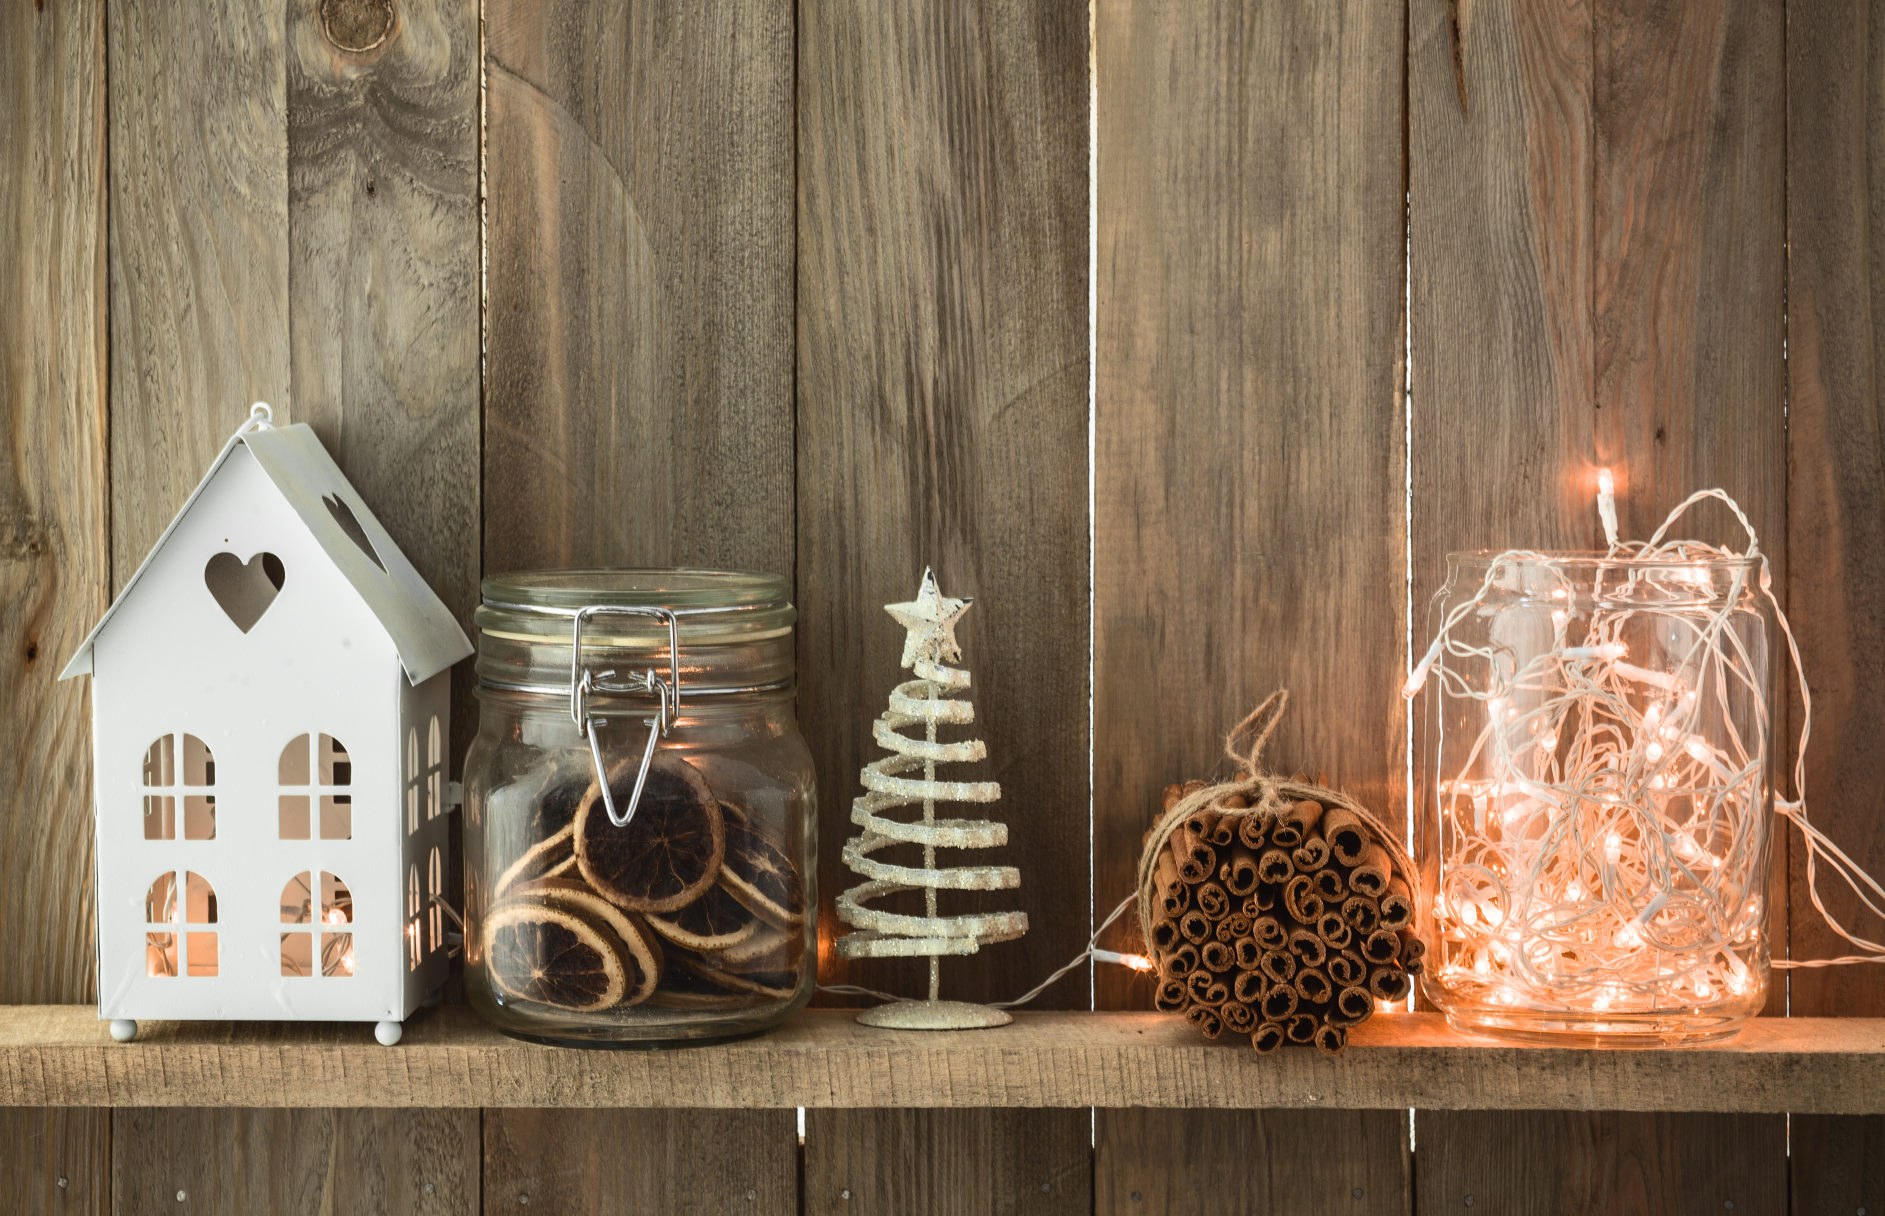 How to decorate for Christmas on a budget